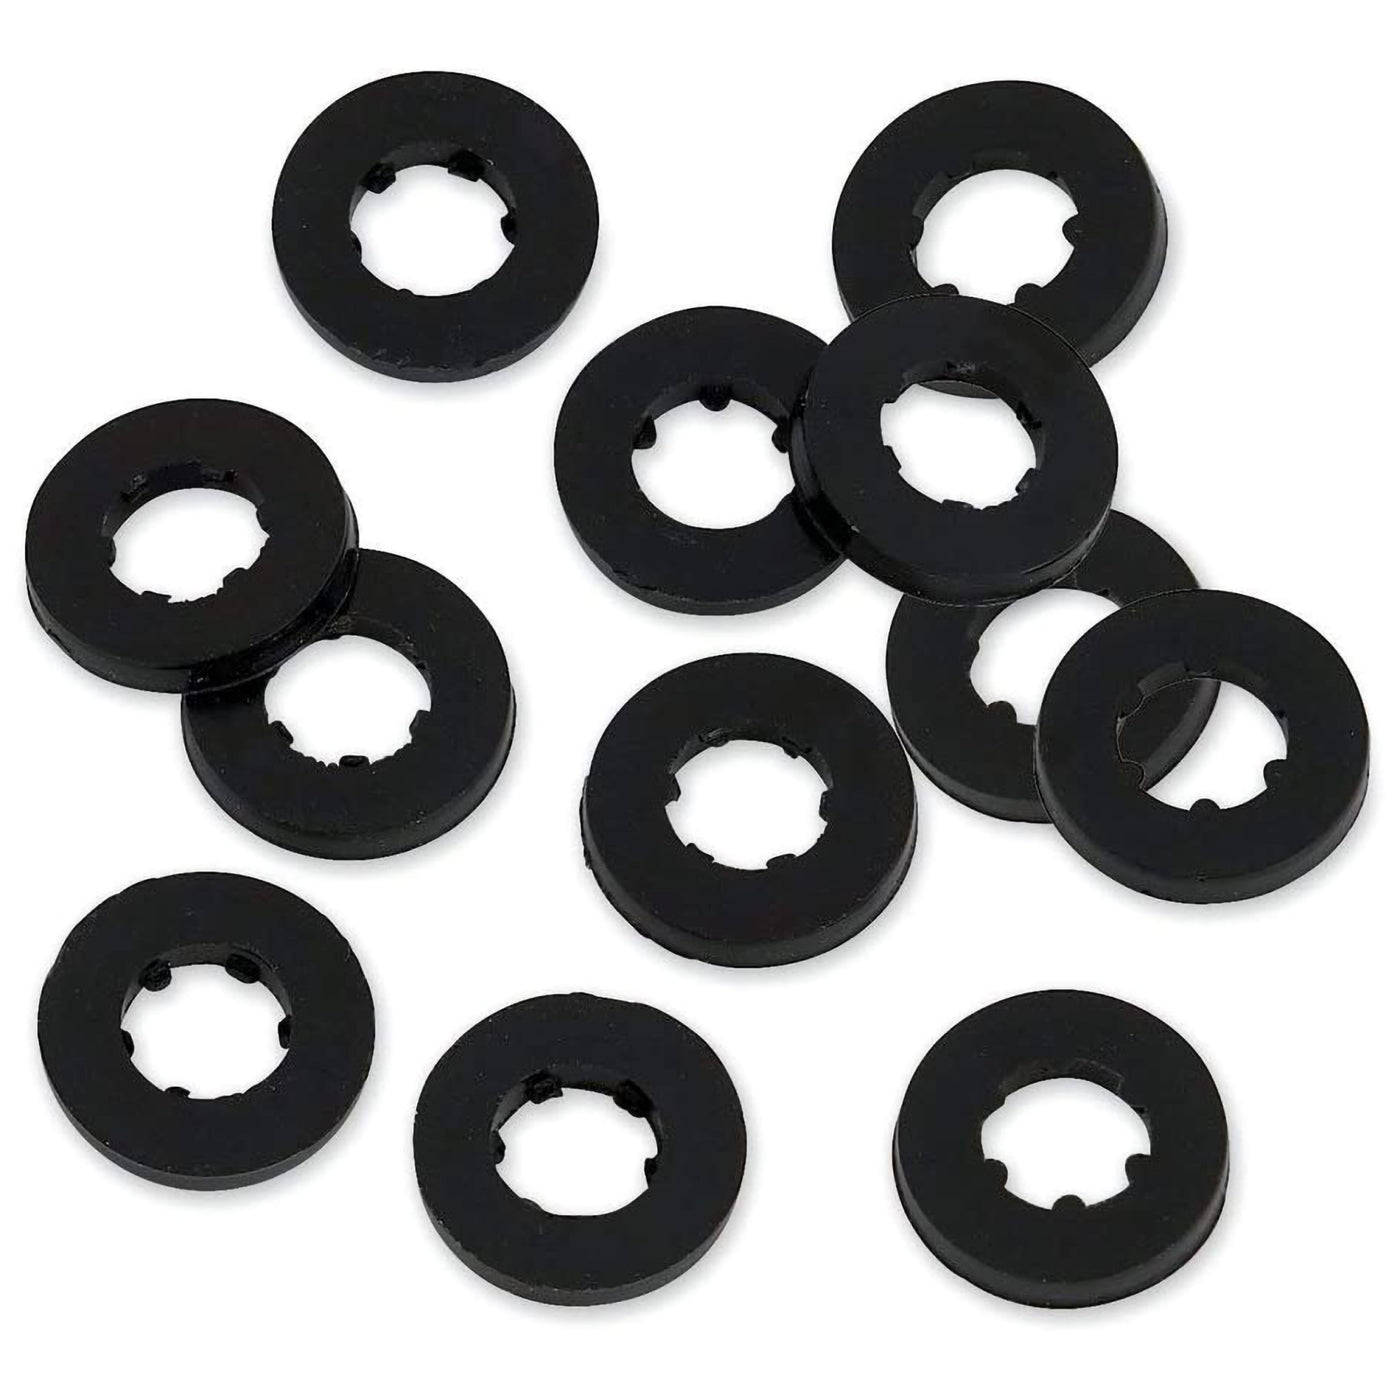 DW PDP Nylon Washers, 12 Pack